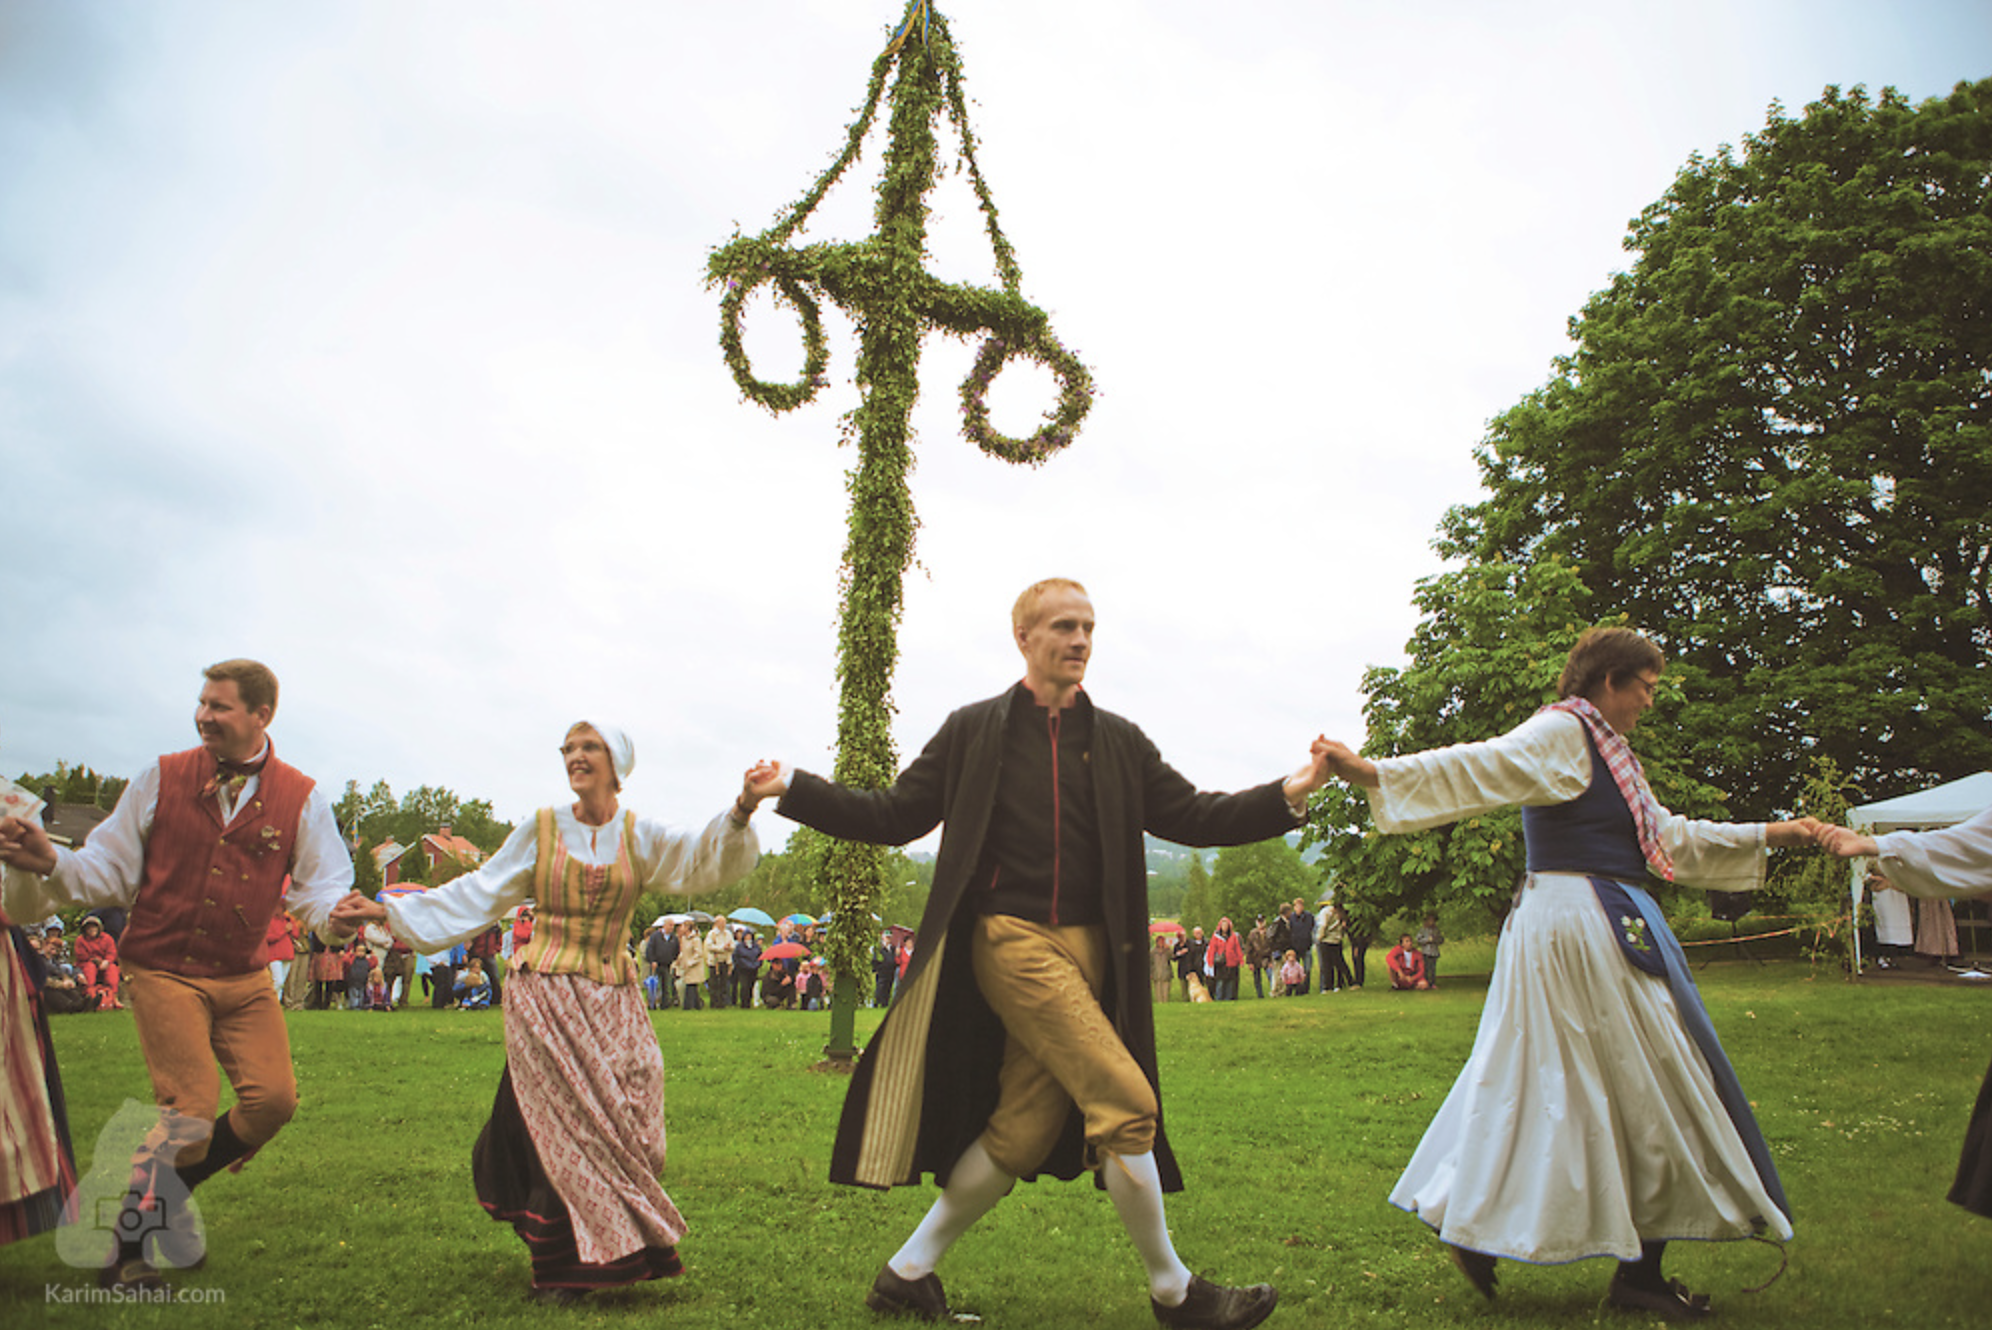 5 Midsummer Traditions From Around the World